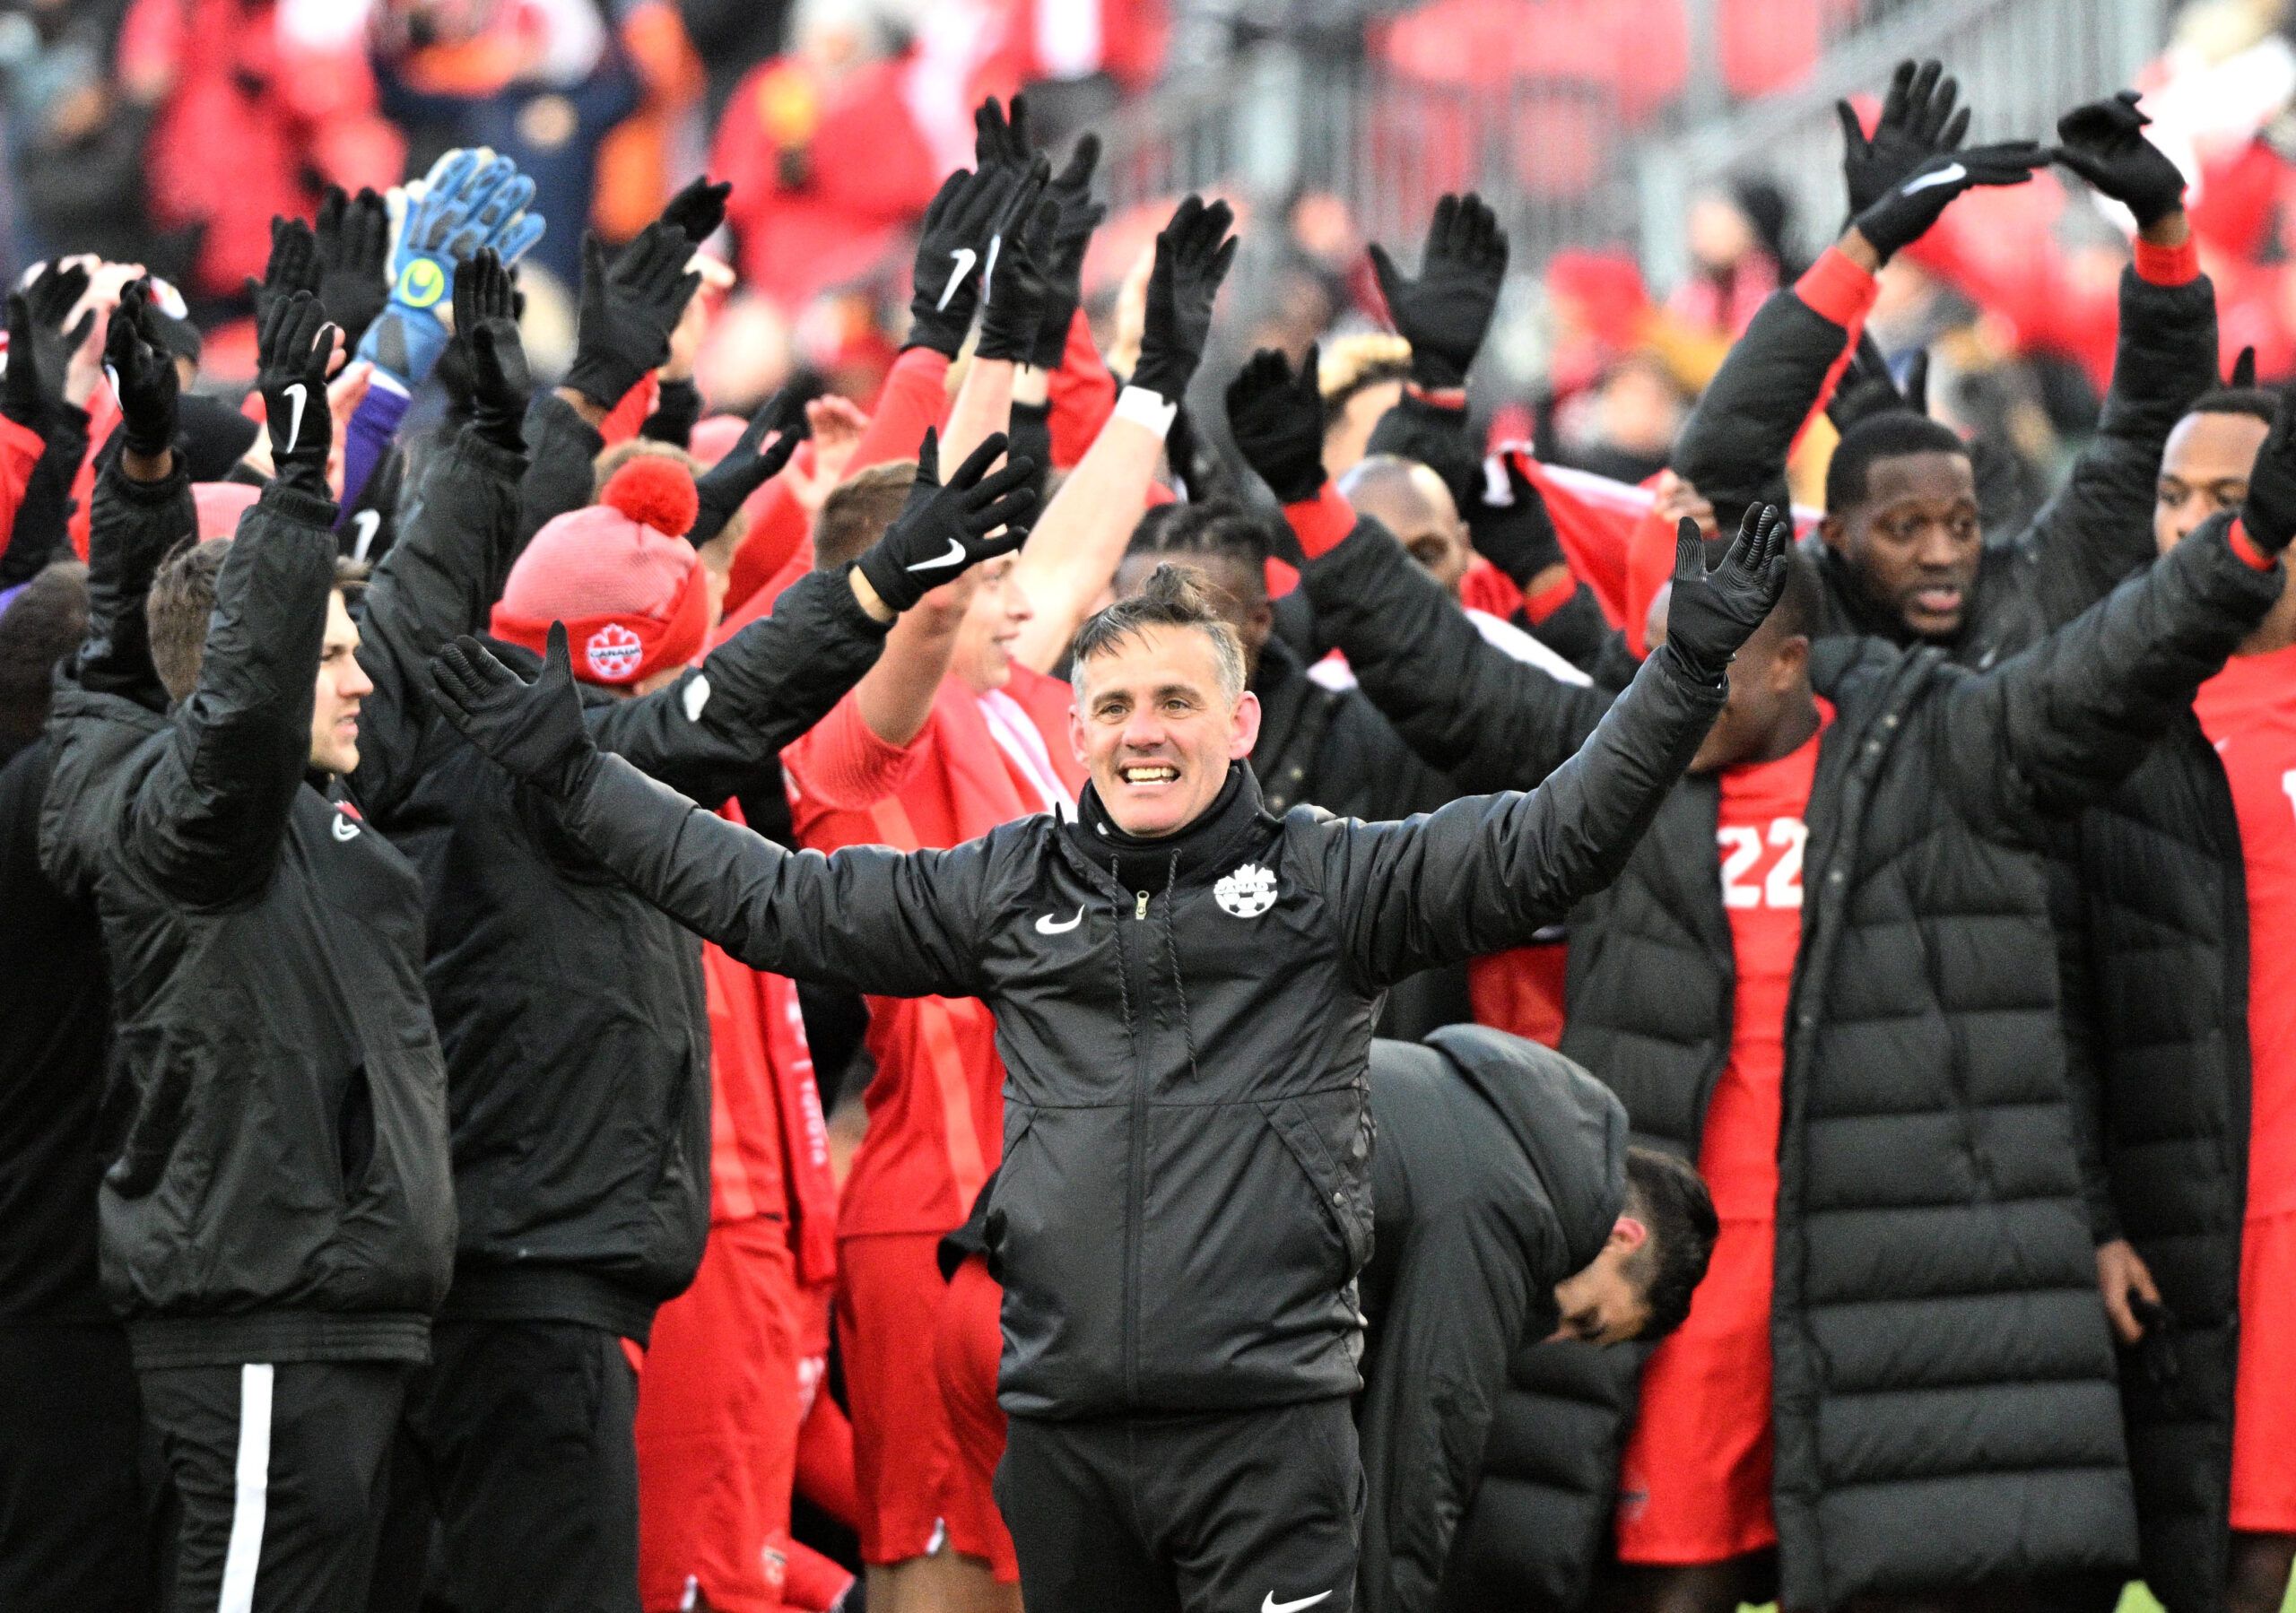 Mar 27, 2022; Toronto, Ontario, CAN;   Canada head coach John Herdman leads his players in the Viking Clap as they celebrate a win over Jamaica in a FIFA World Cup qualifying soccer match at BMO Field. Mandatory Credit: Dan Hamilton-USA TODAY Sports